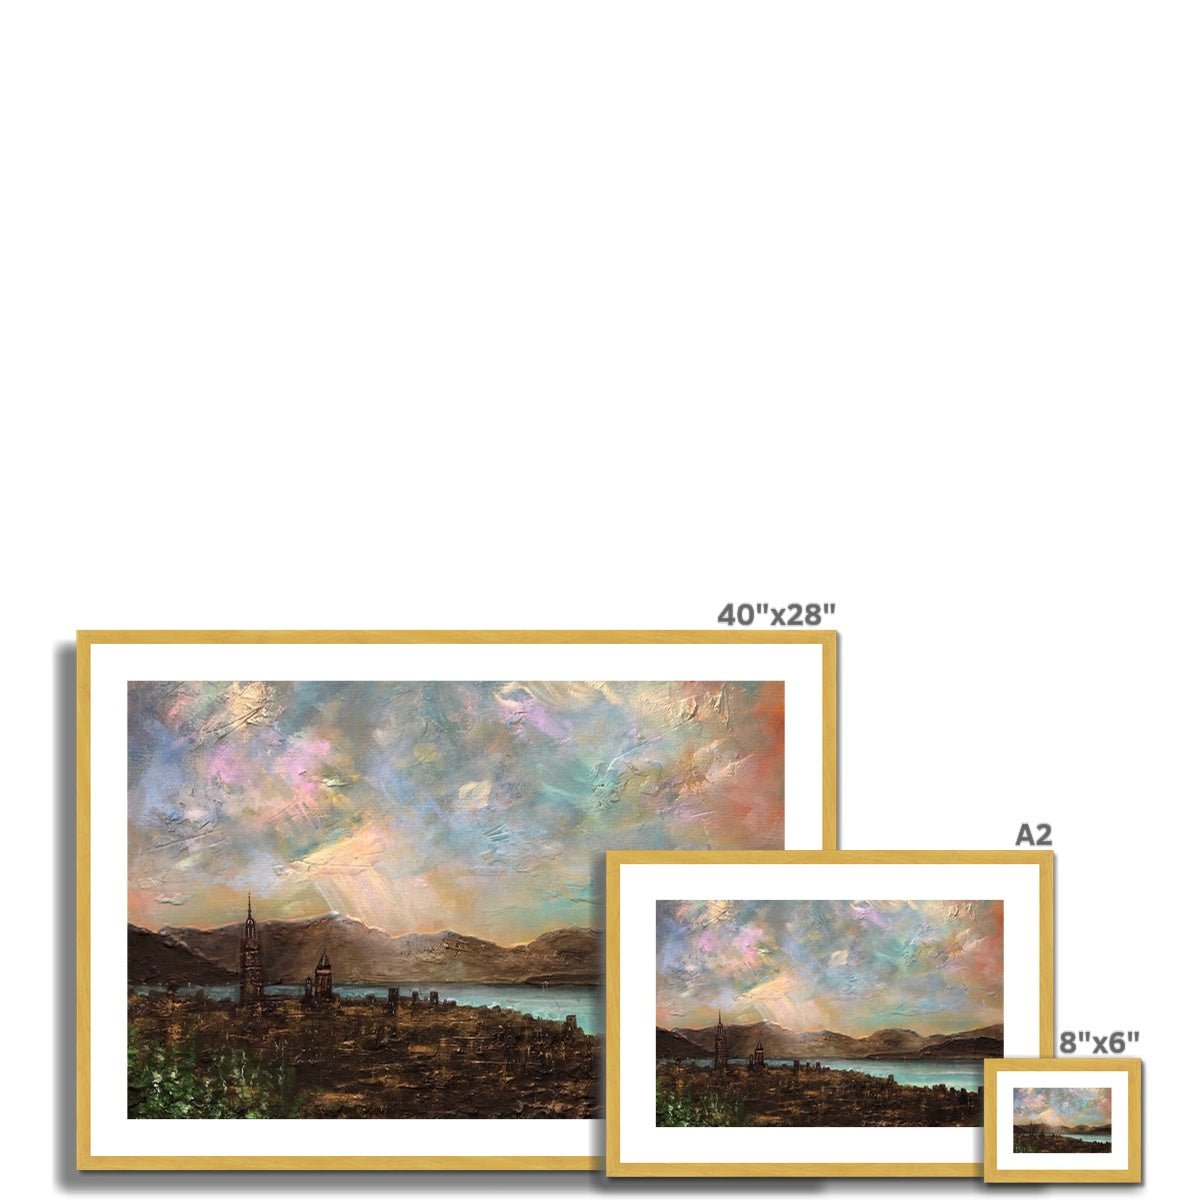 Angels Fingers Over Greenock Painting | Antique Framed & Mounted Prints From Scotland-Antique Framed & Mounted Prints-River Clyde Art Gallery-Paintings, Prints, Homeware, Art Gifts From Scotland By Scottish Artist Kevin Hunter